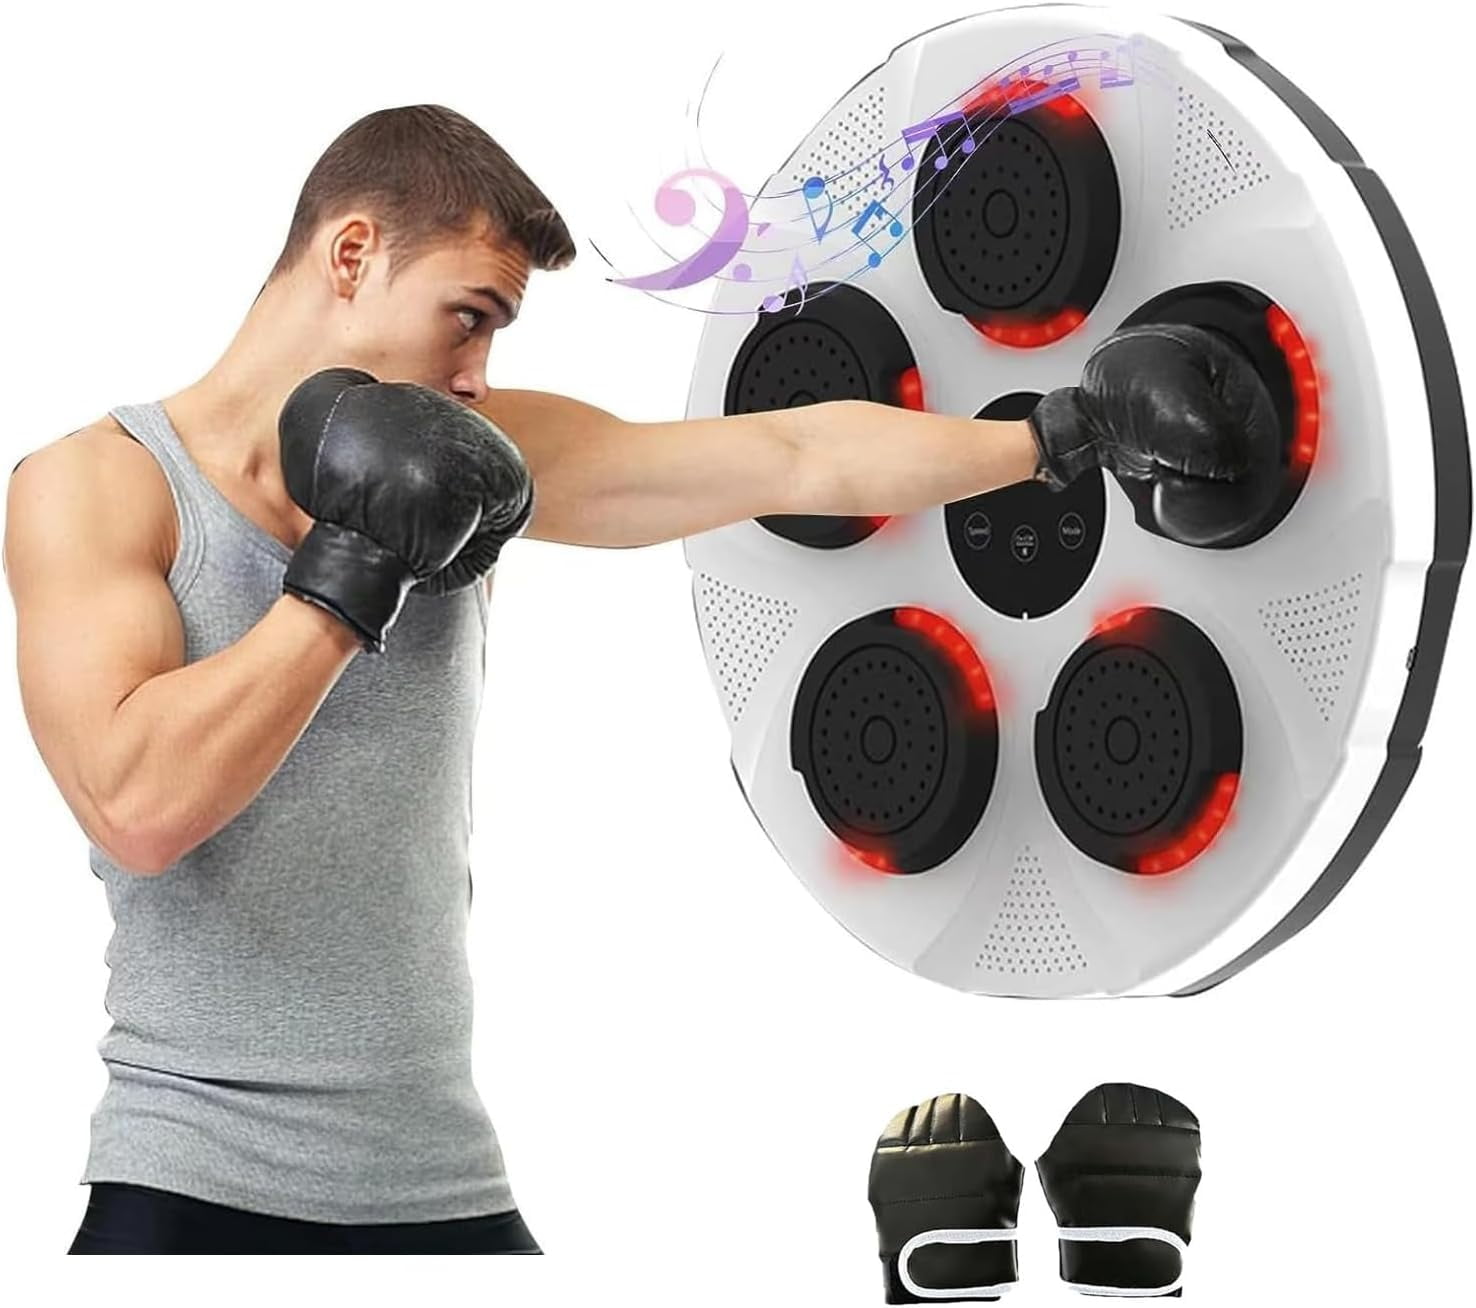  Music Boxing Machine Home Wall Mounted Boxer, Electronic Smart Musical  Boxing Workout Training Punching Equipment Indoor, Boxing Pad Target  Trainer,Black/Blue : Sports & Outdoors